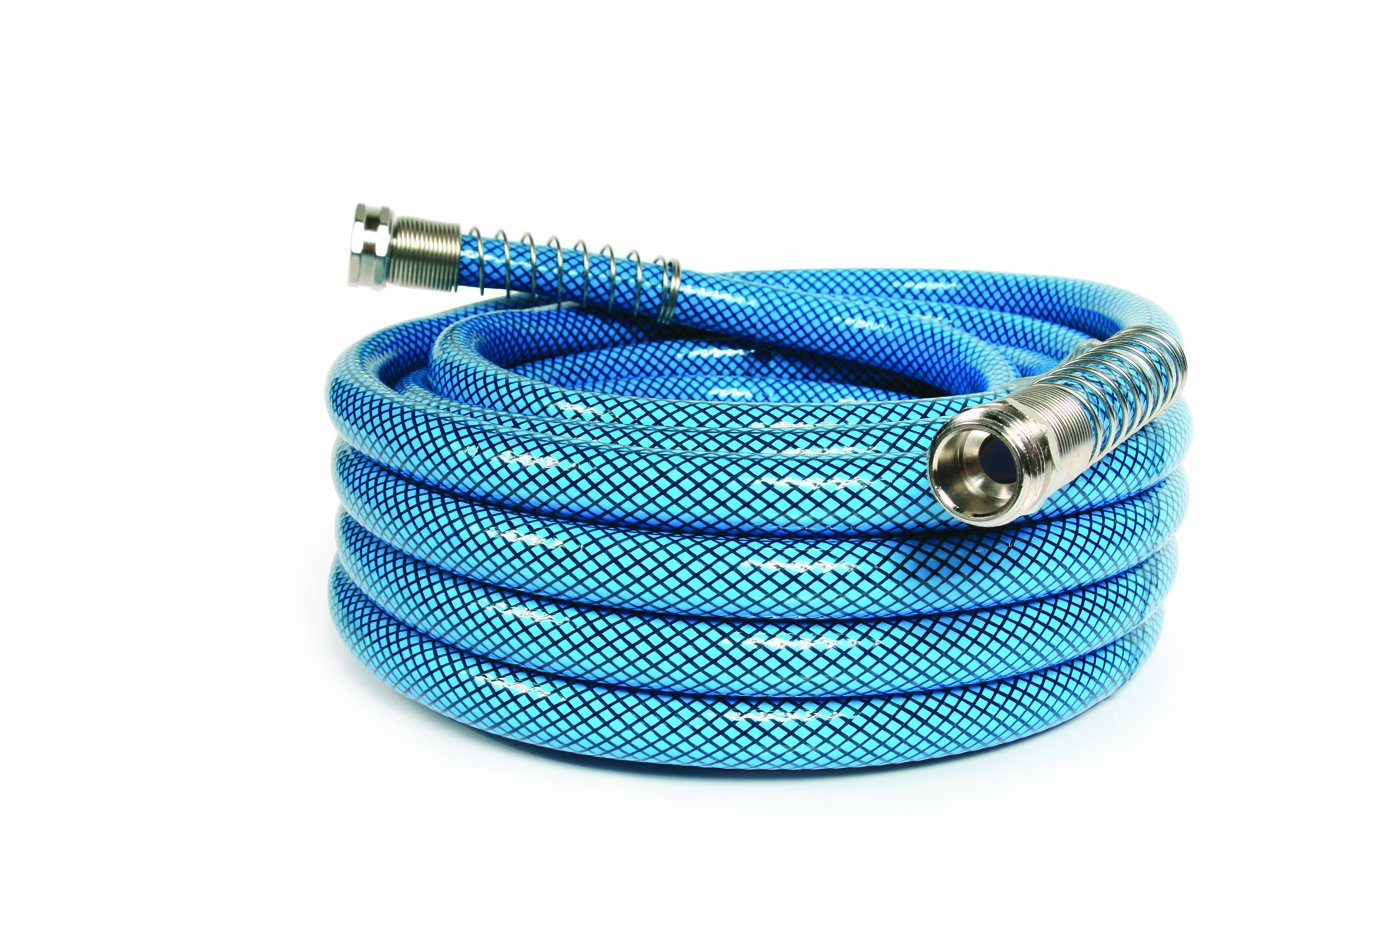 Camco 35ft Premium Drinking Water Hose - Lead and BPA Free, Anti-Kink Design, 20% Thicker Than Standard Hoses 5/8"Inside Diameter (22843)